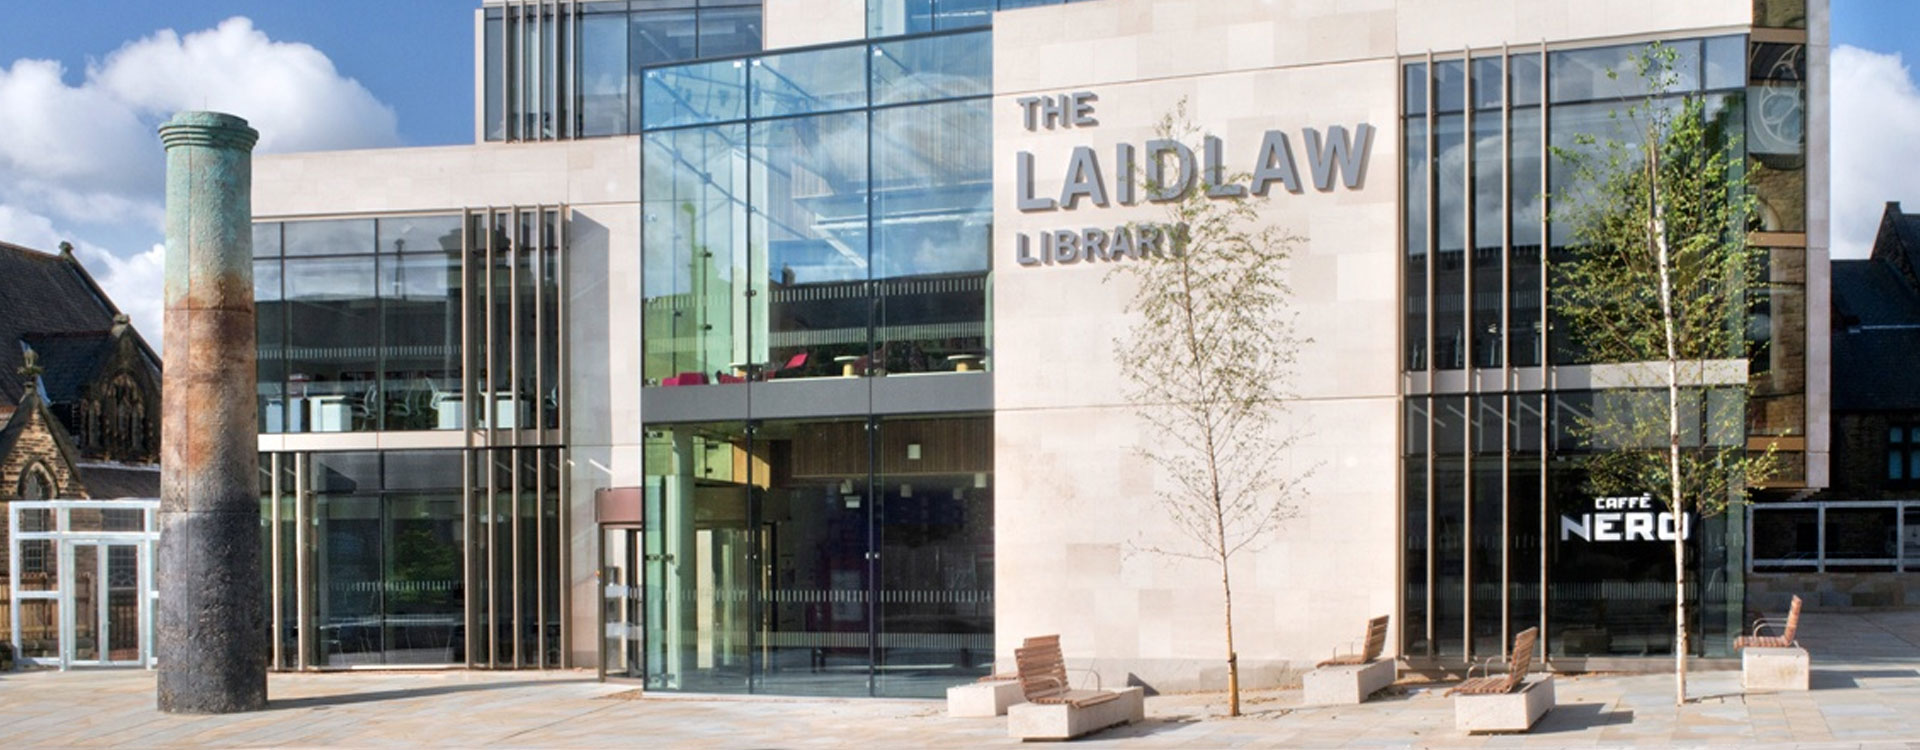 Leeds Laidlaw Library shortlisted for The SCONUL Library Design Awards